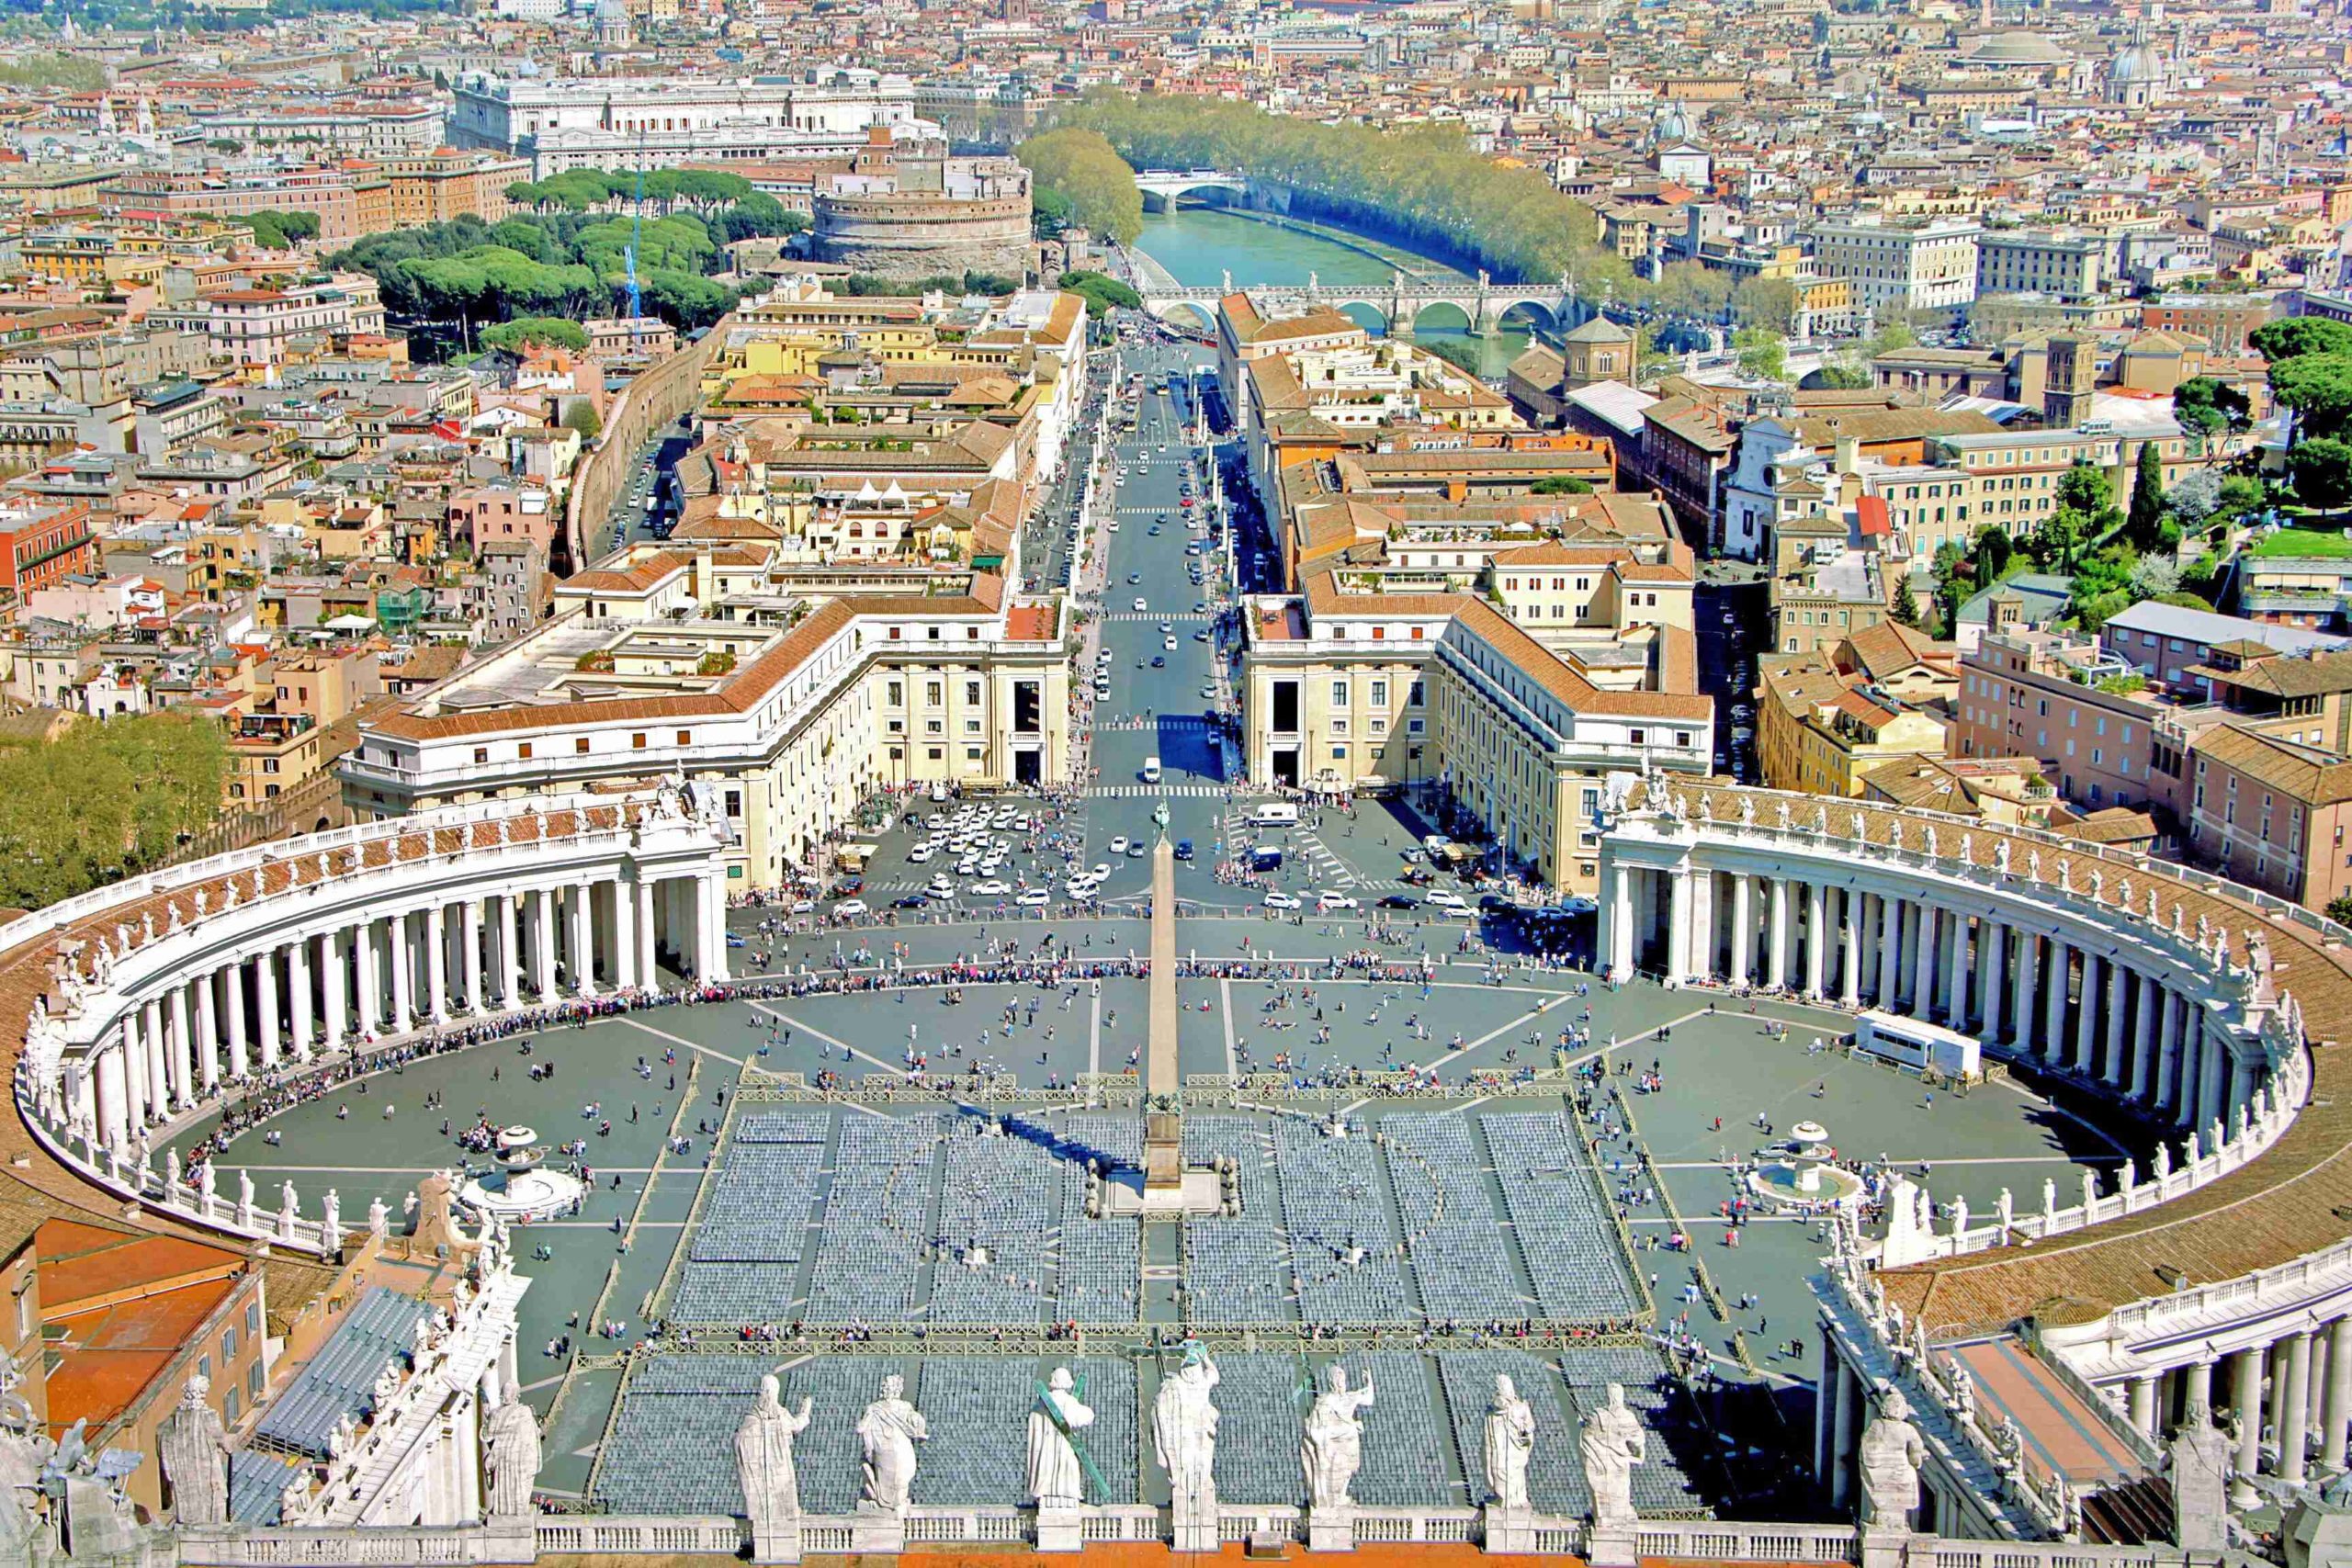 Colonnade of St. Peter's Basilica